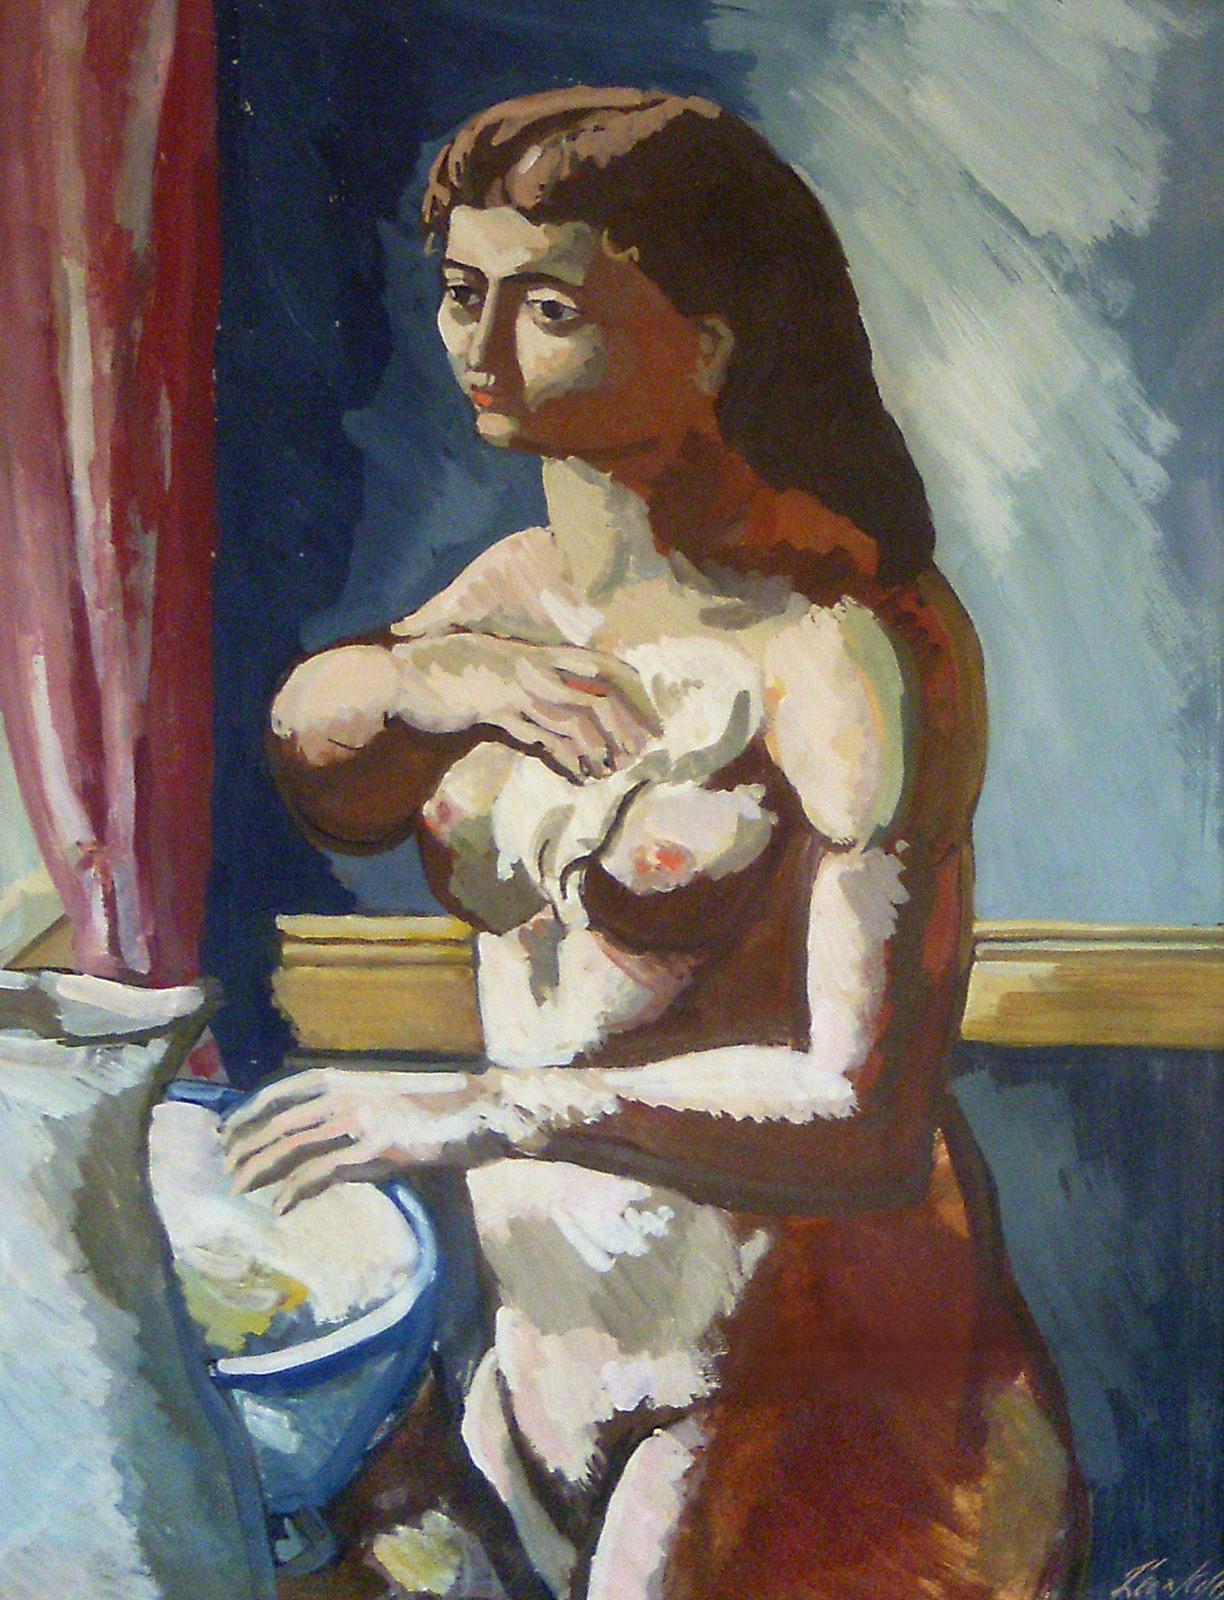 Leon Kelly Portrait Painting - Woman at Basin, Picasso Style Portrait of a Female Nude, American Modernist